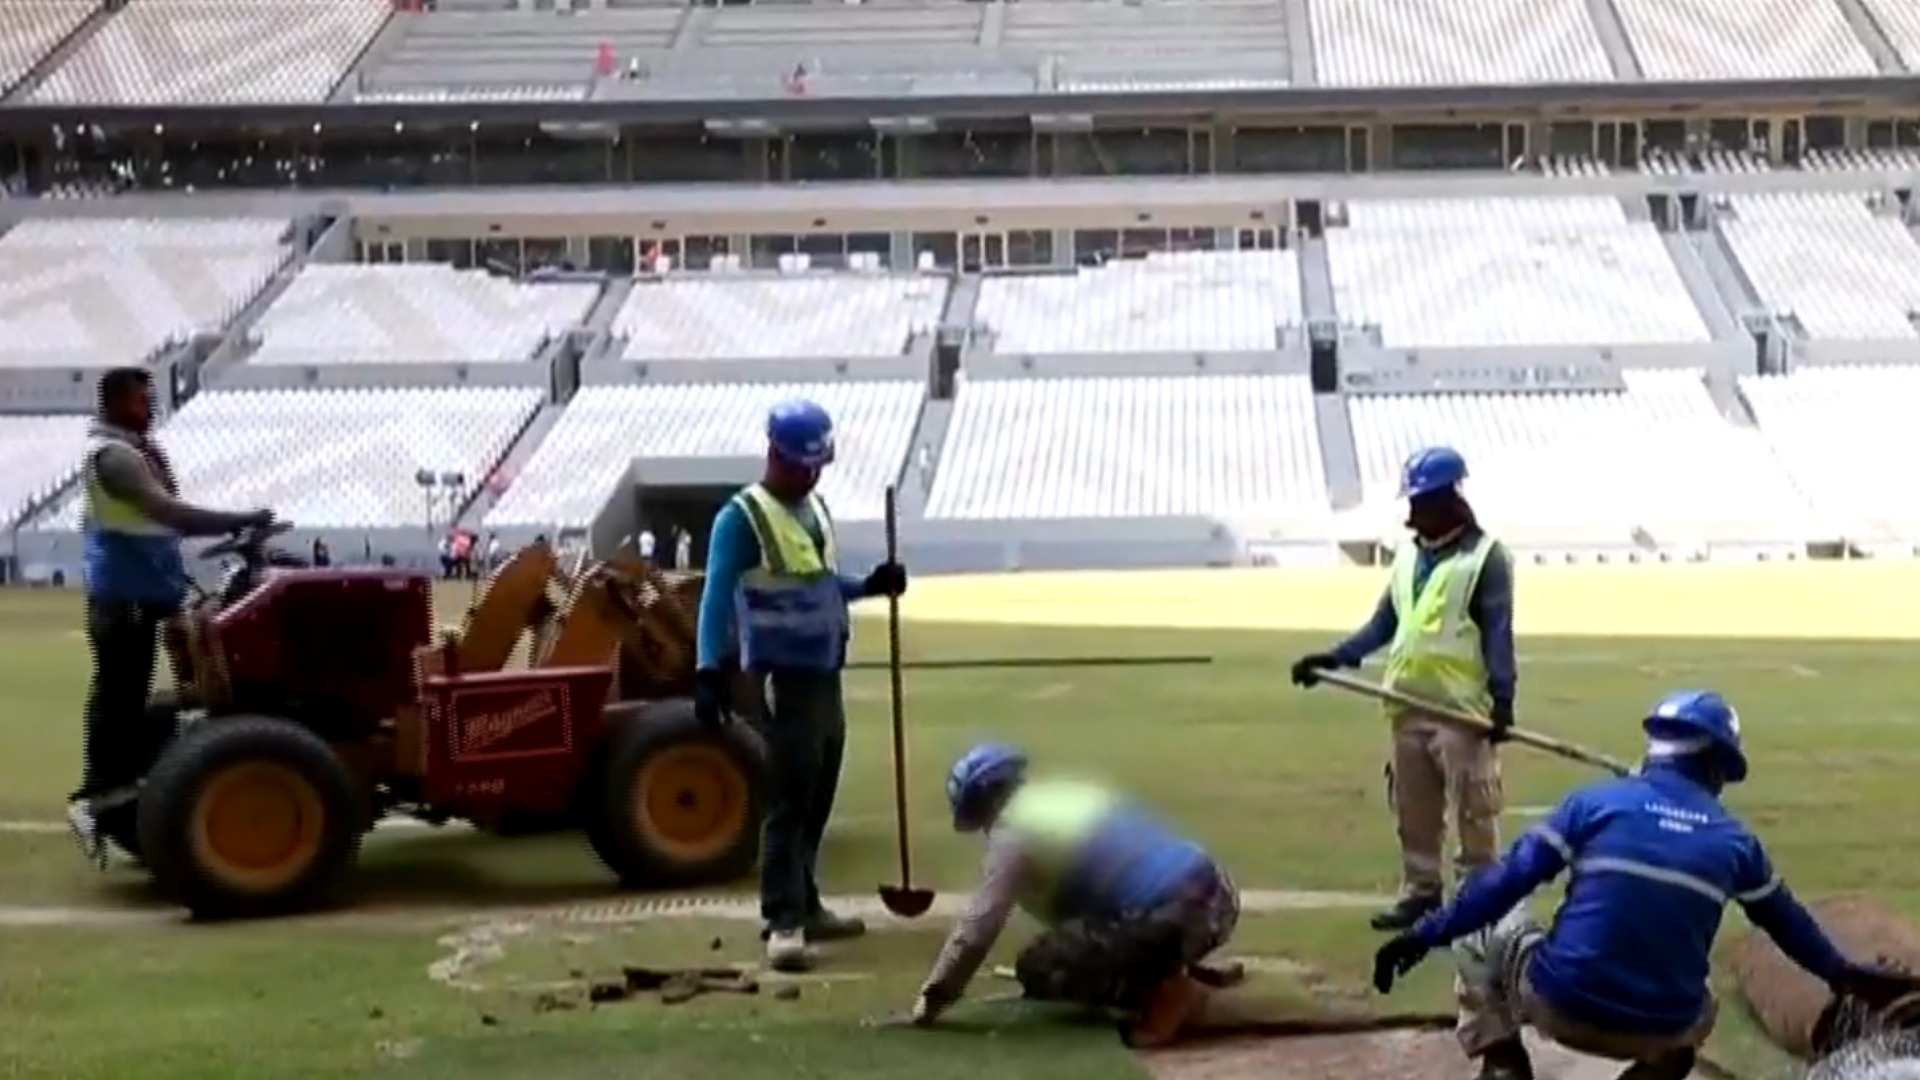 Watch CBS Evening News: Qatar accused of labor abuses ahead of World Cup -  Full show on CBS